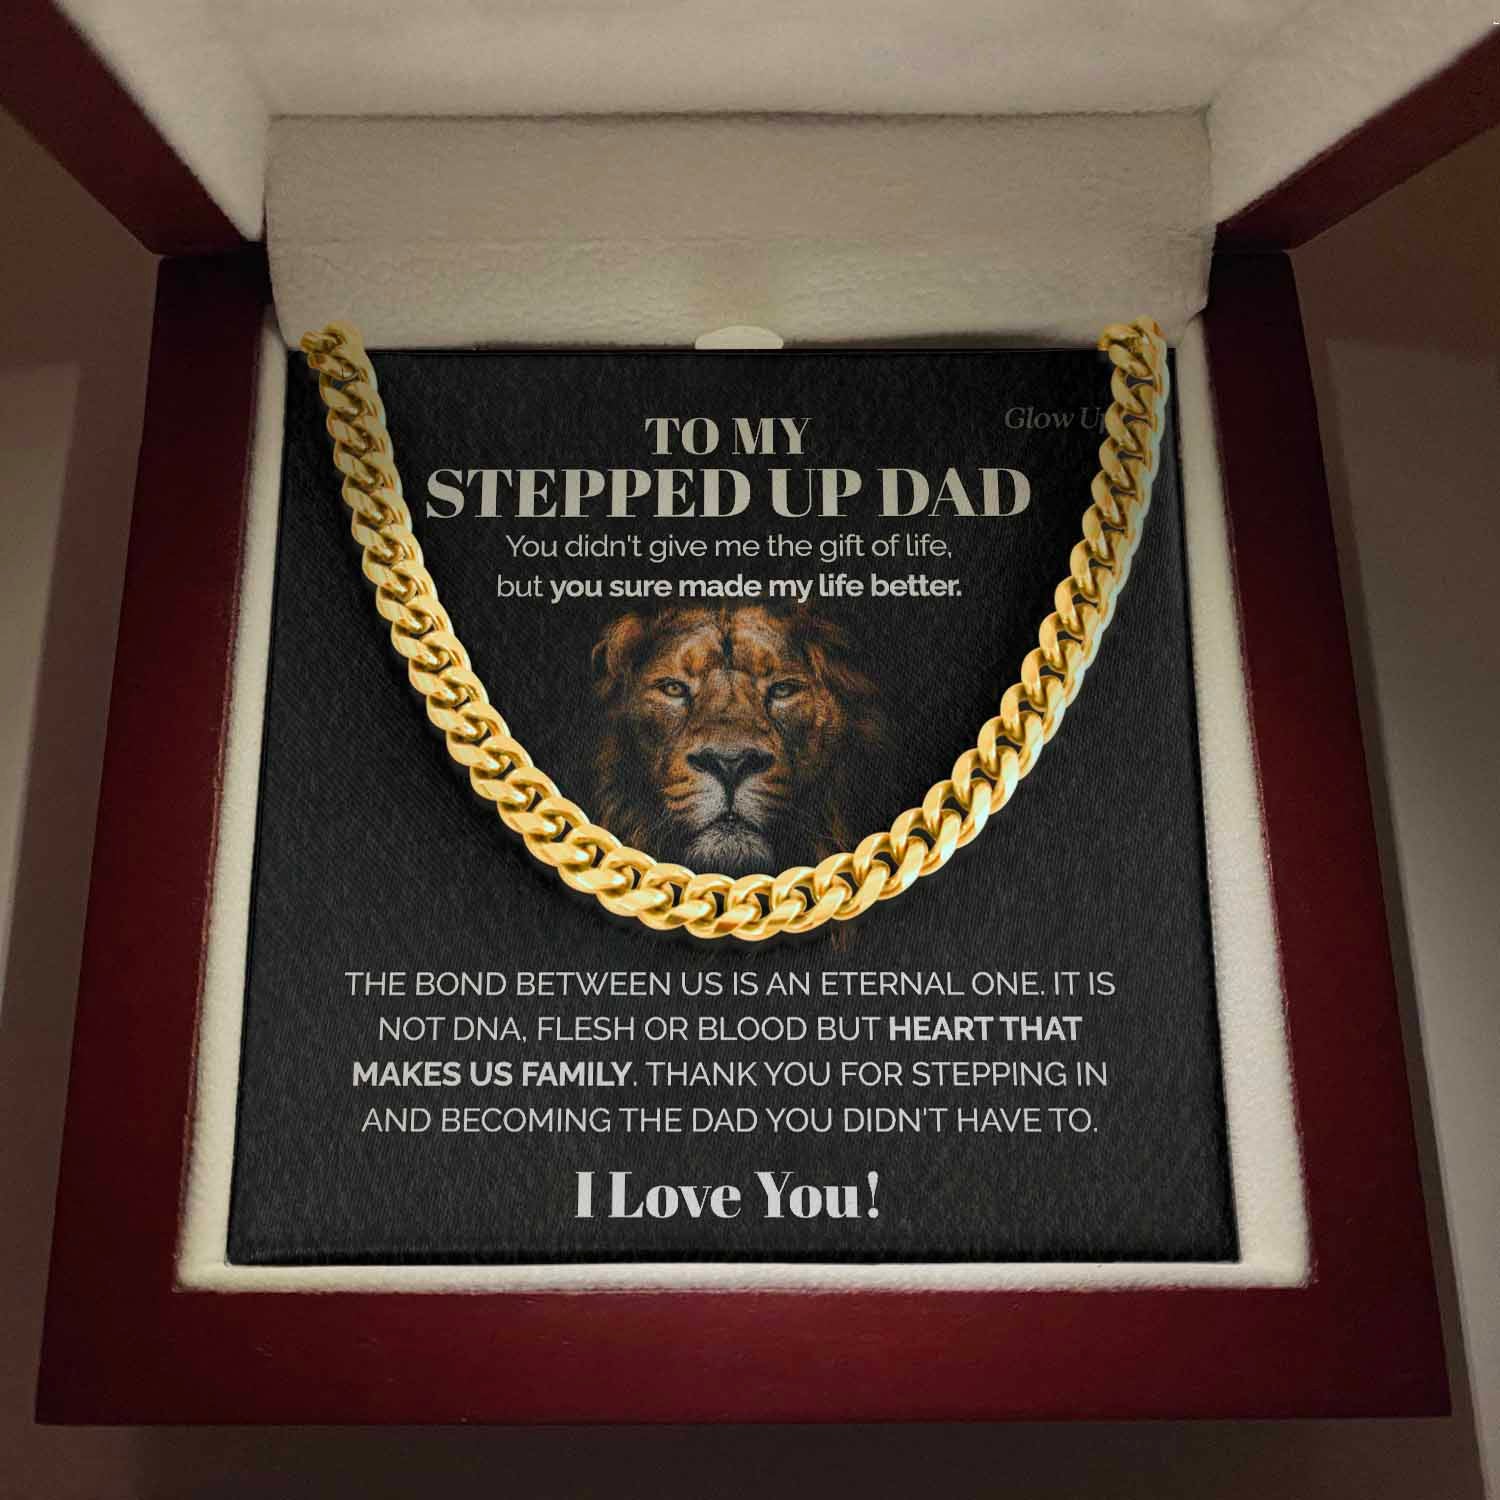 ShineOn Fulfillment Jewelry To my Stepped up Dad - You sure made my life better - Cuban Link Chain